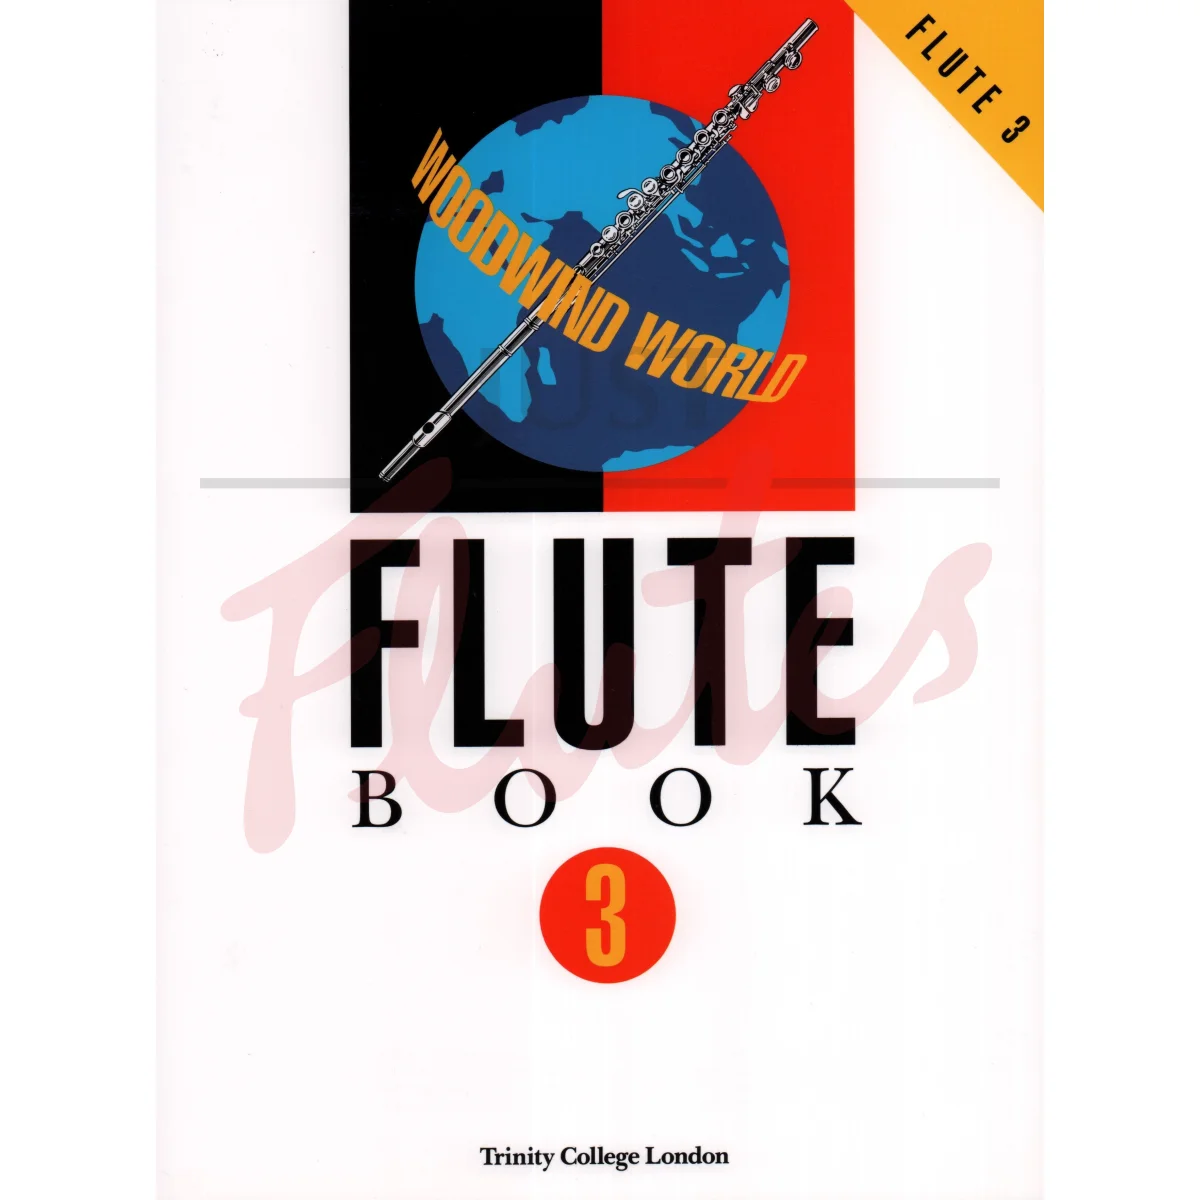 Woodwind World Flute Book 3 (Complete)